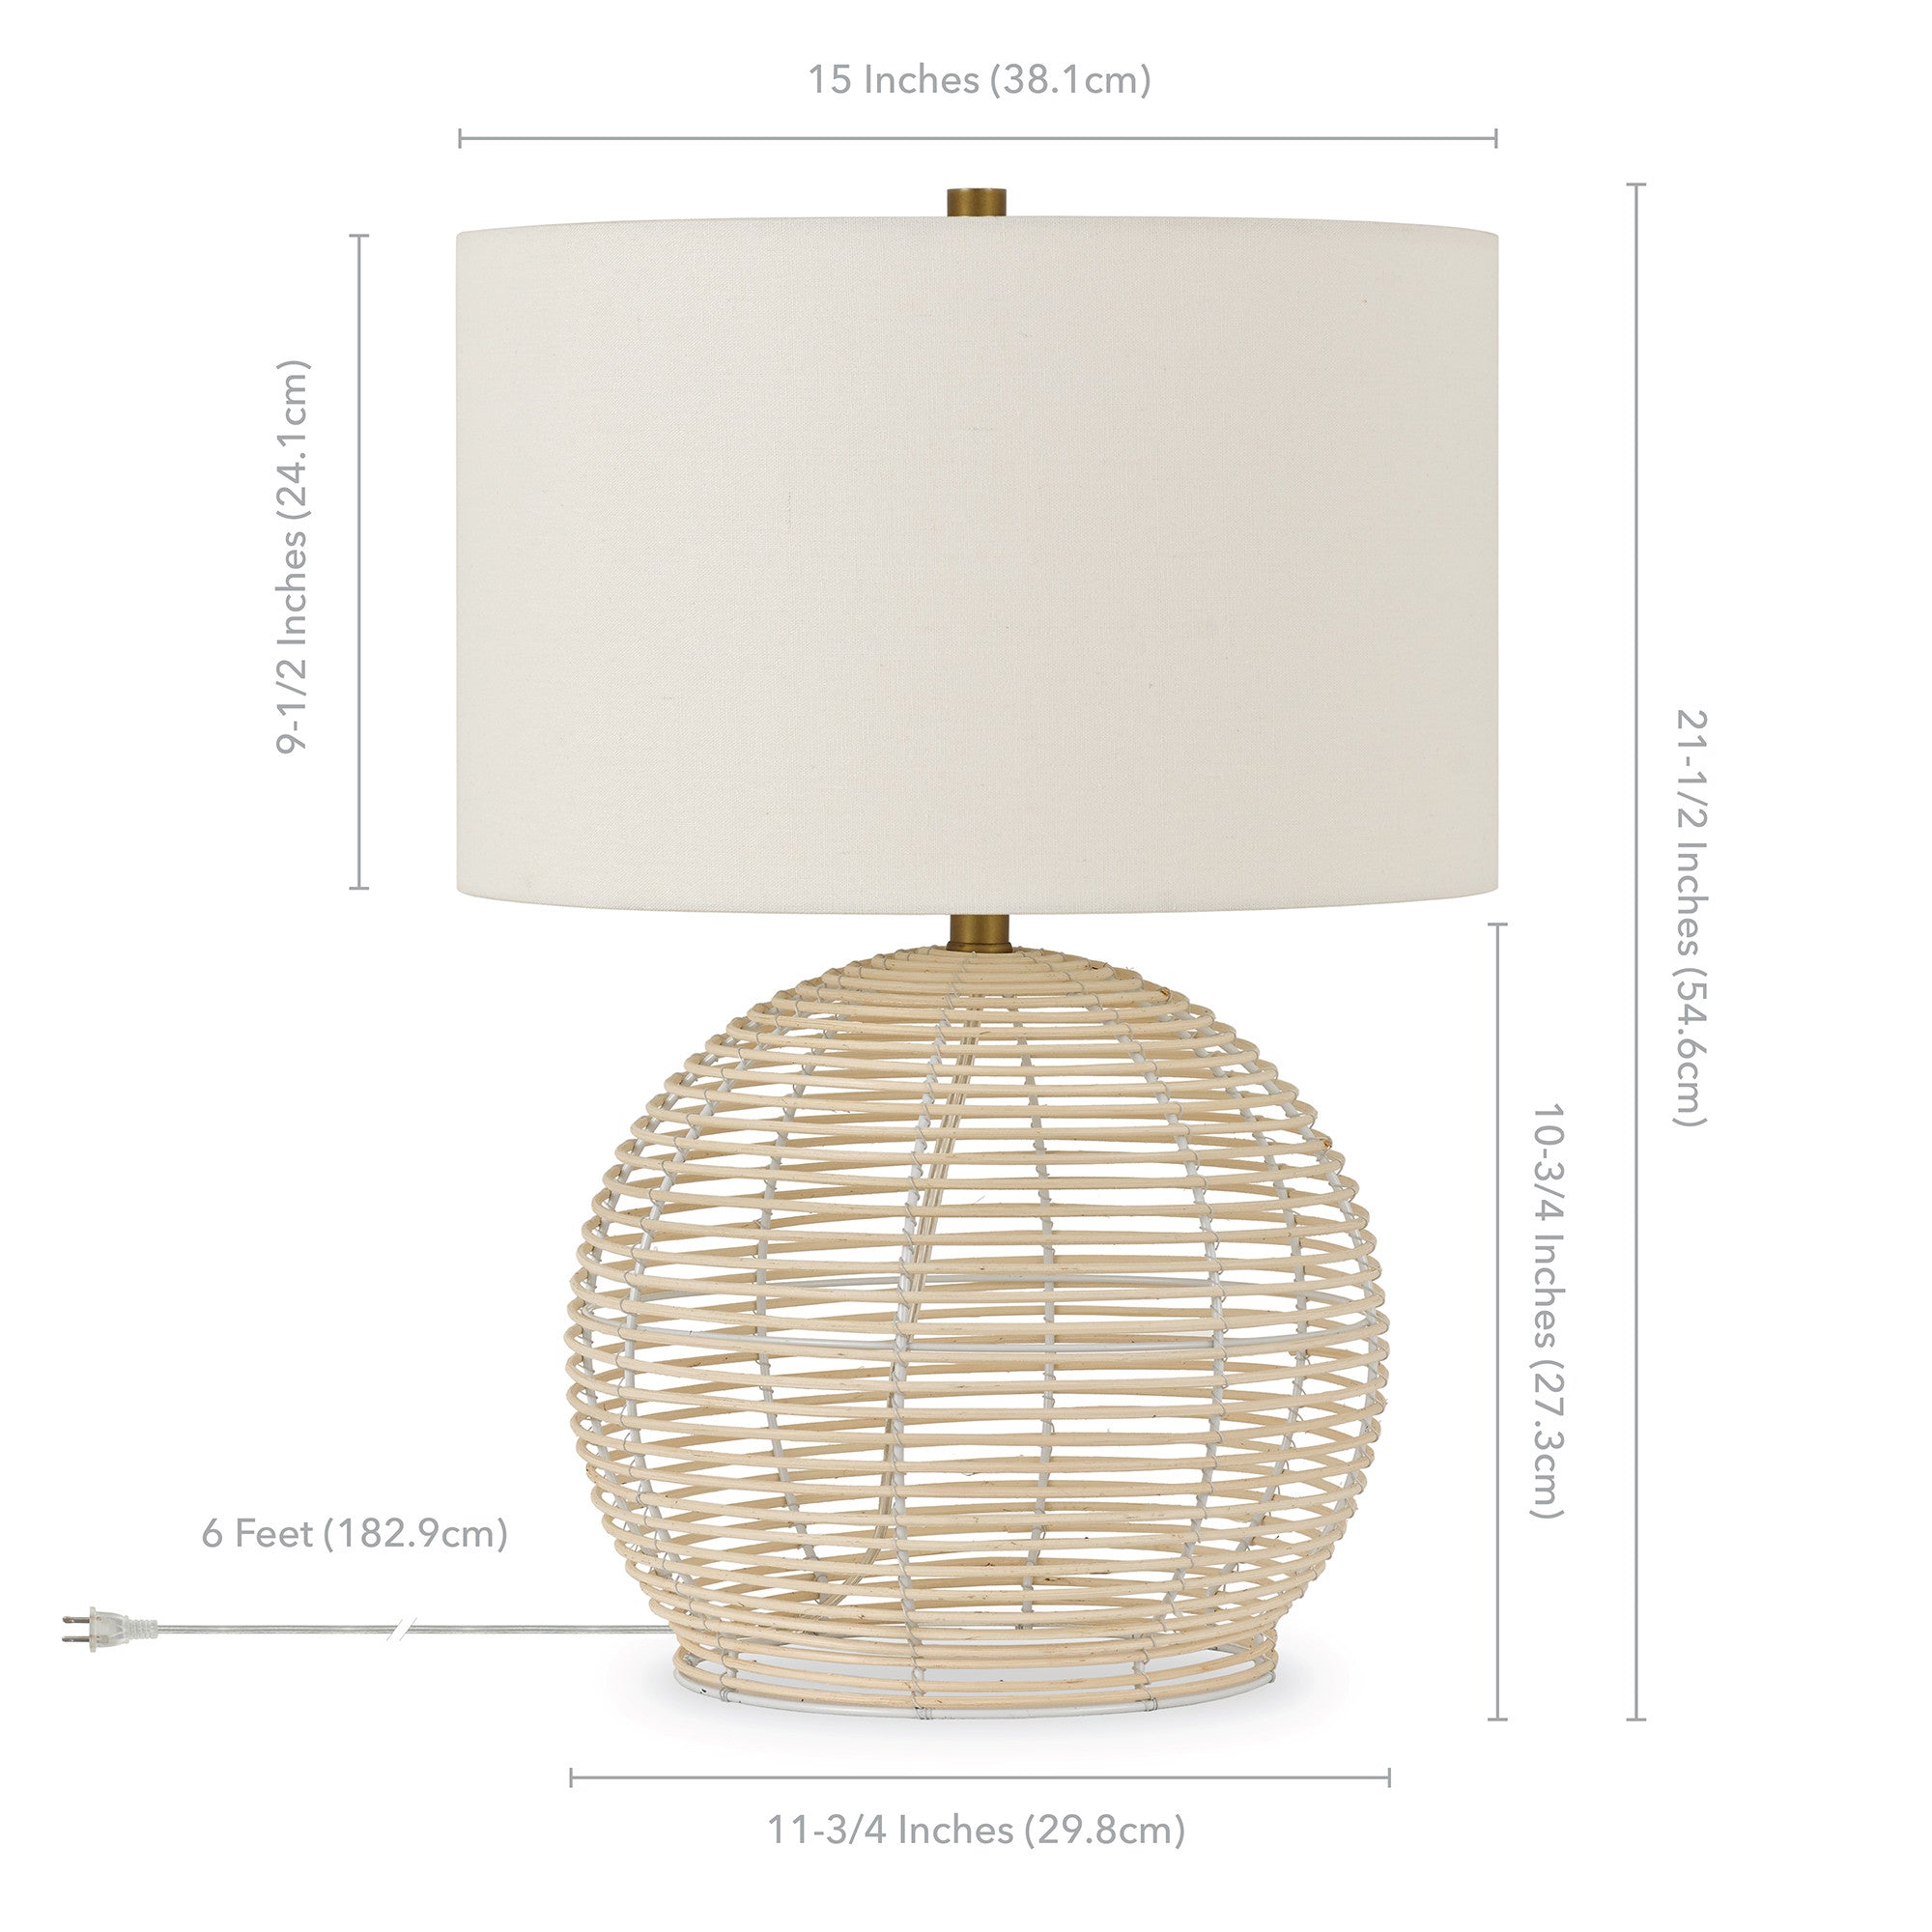 21" Natural Rattan Table Lamp With White Drum Shade